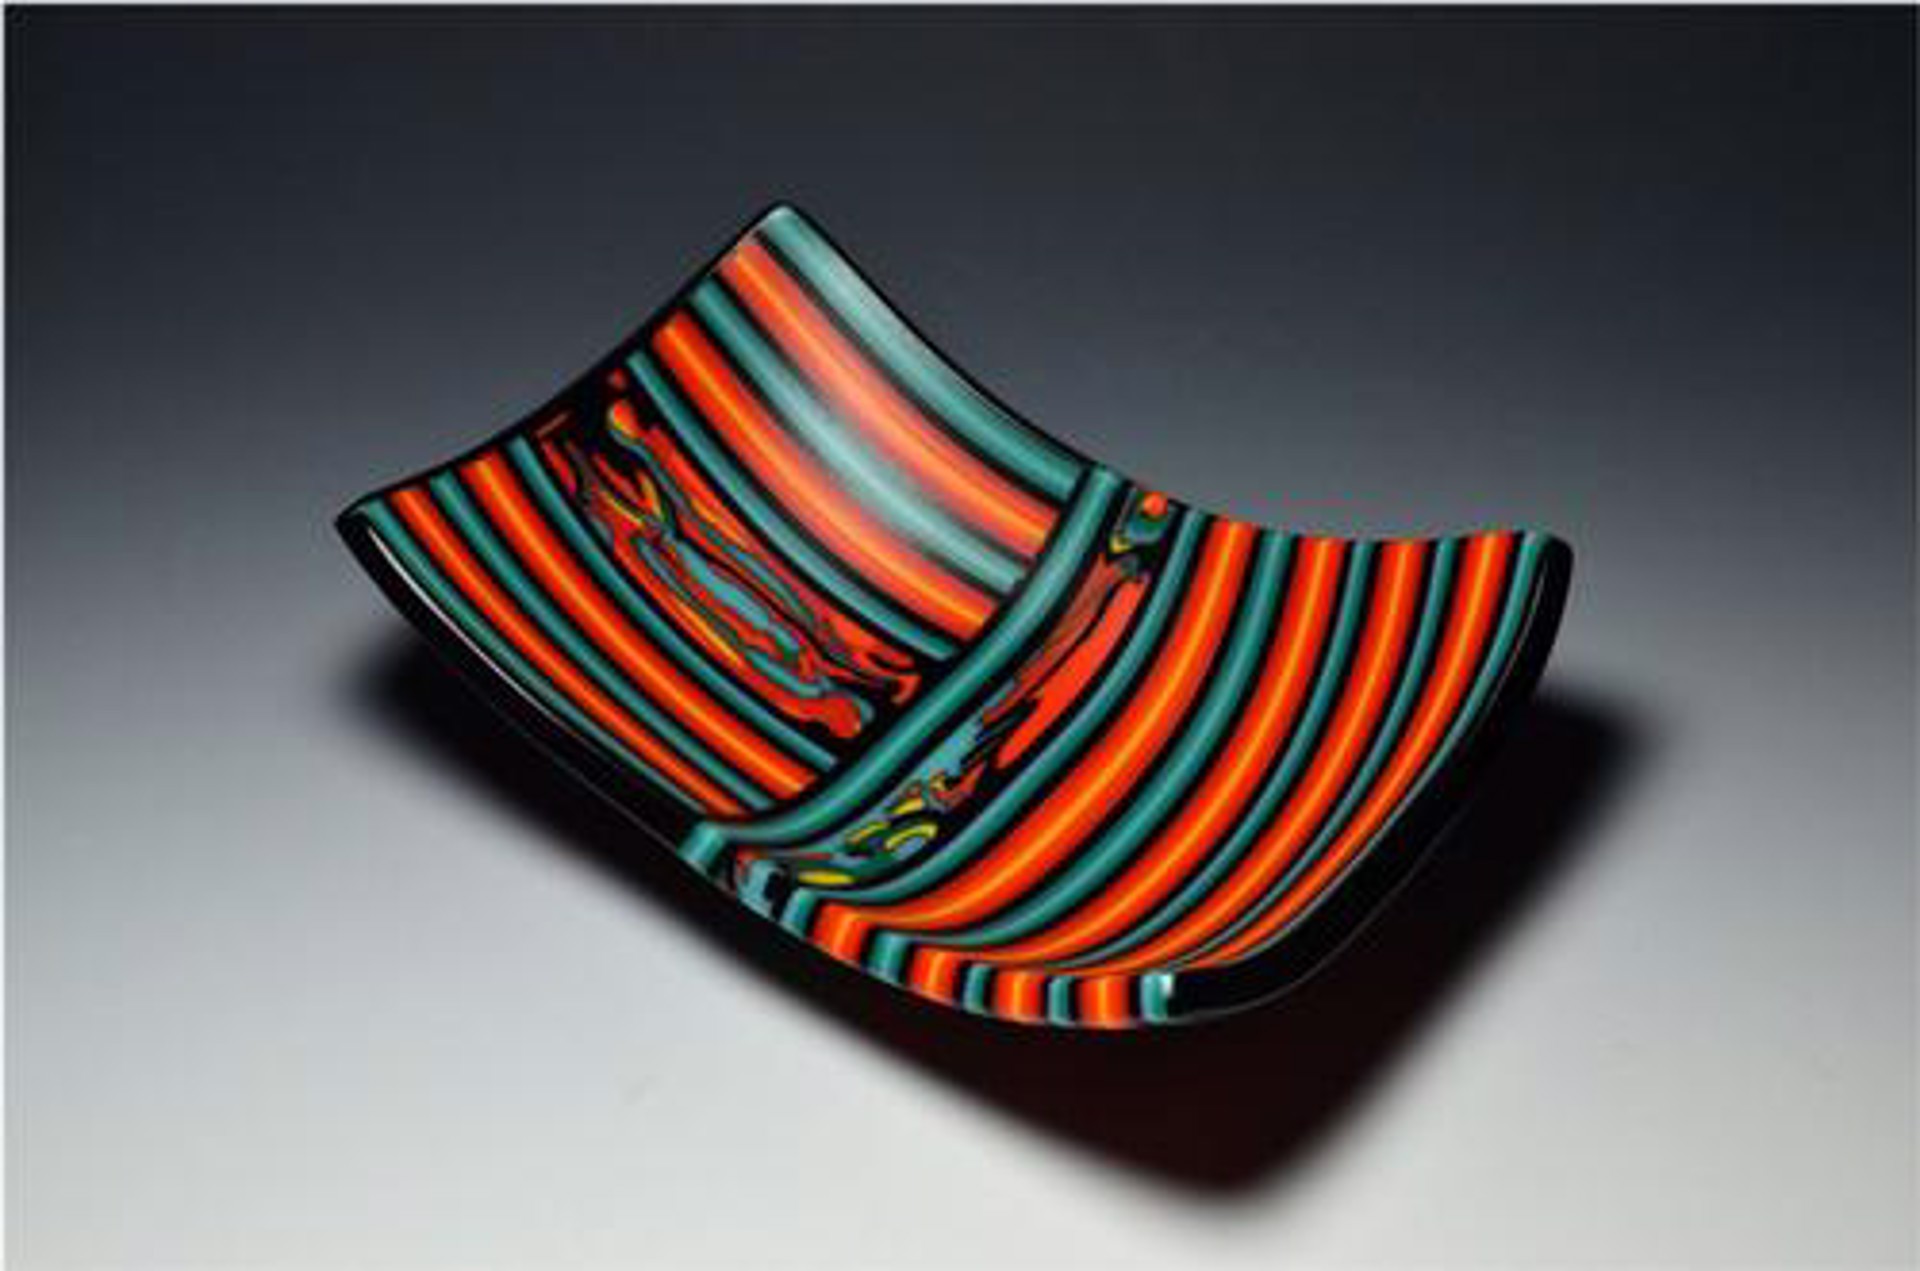 Autumn Refelctions Scoop Bowl by Lydia Piper